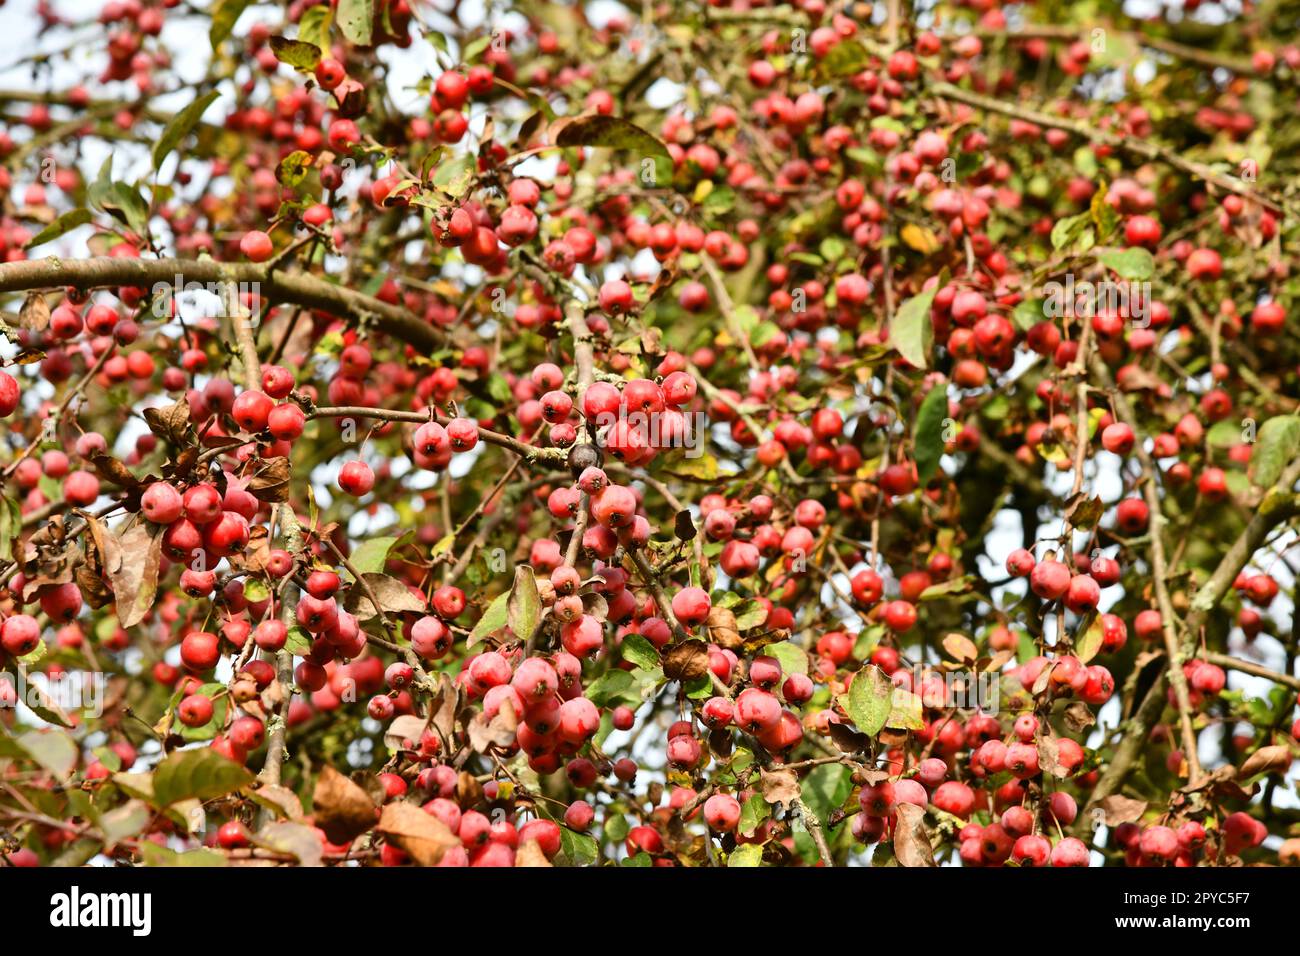 Cherry apple with red fruits- Malus baccata Stock Photo